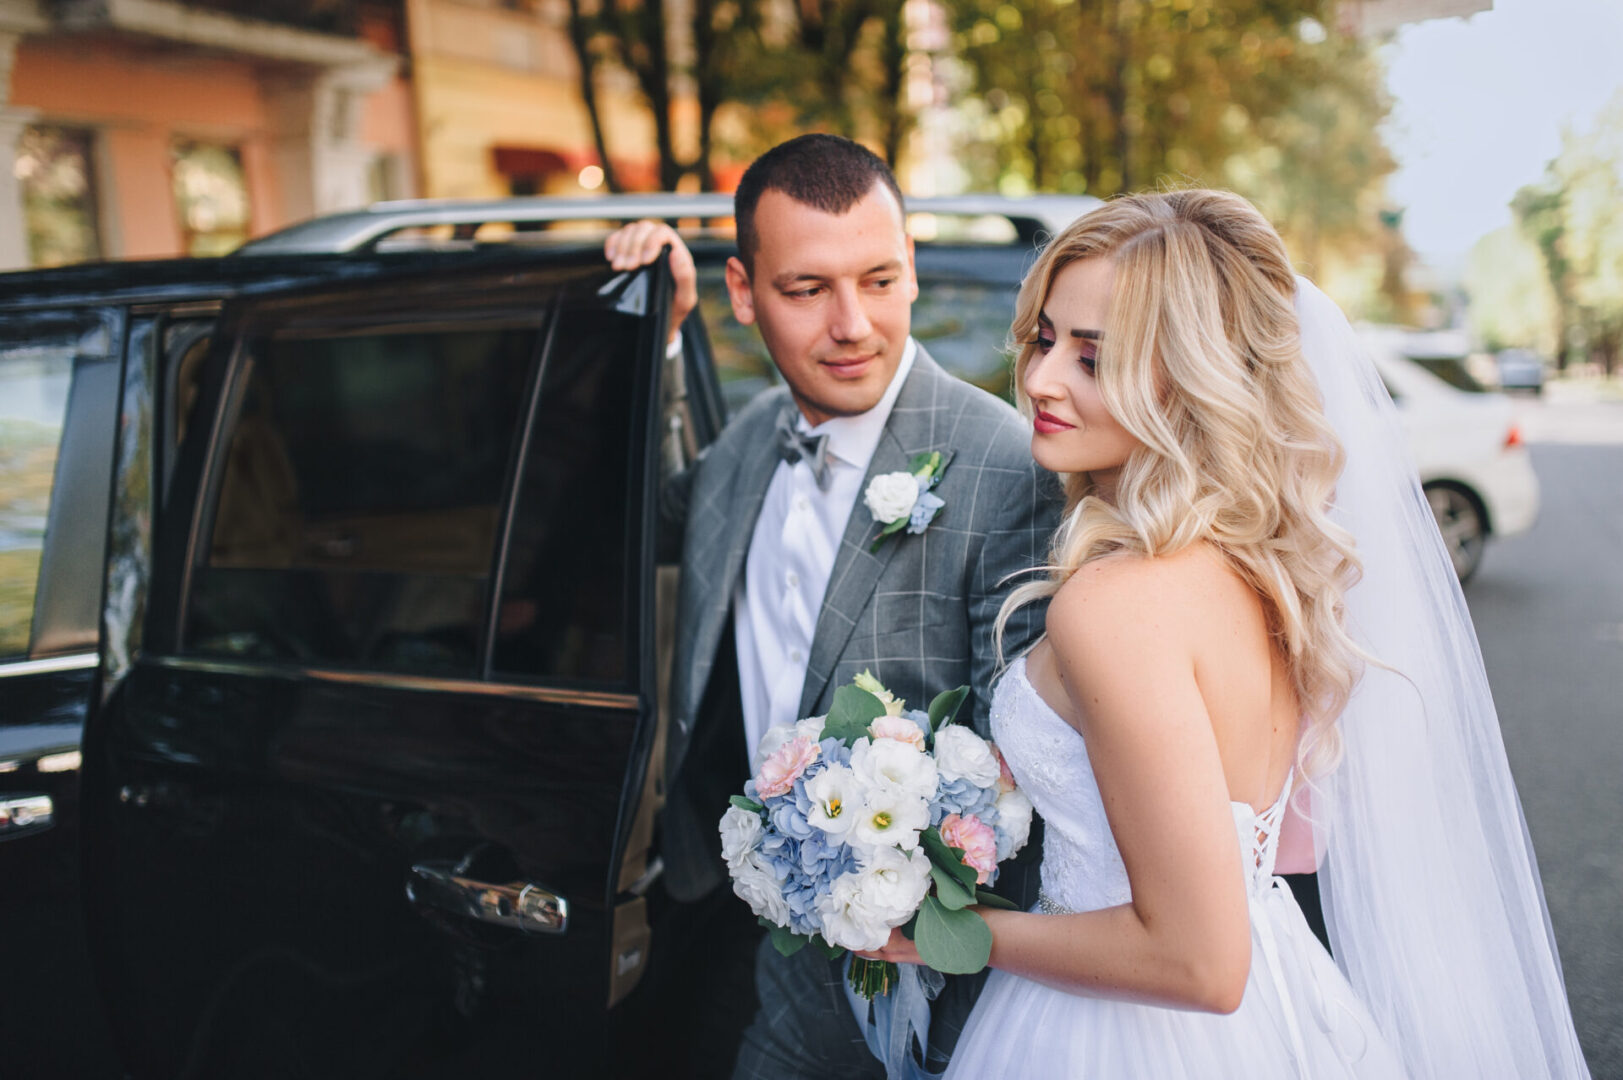 Beautiful and stylish newlyweds stand in the city on the background of the car. A stylish bridegroom, leaning against the door of the car, looks at a sweet bride with curly hair.